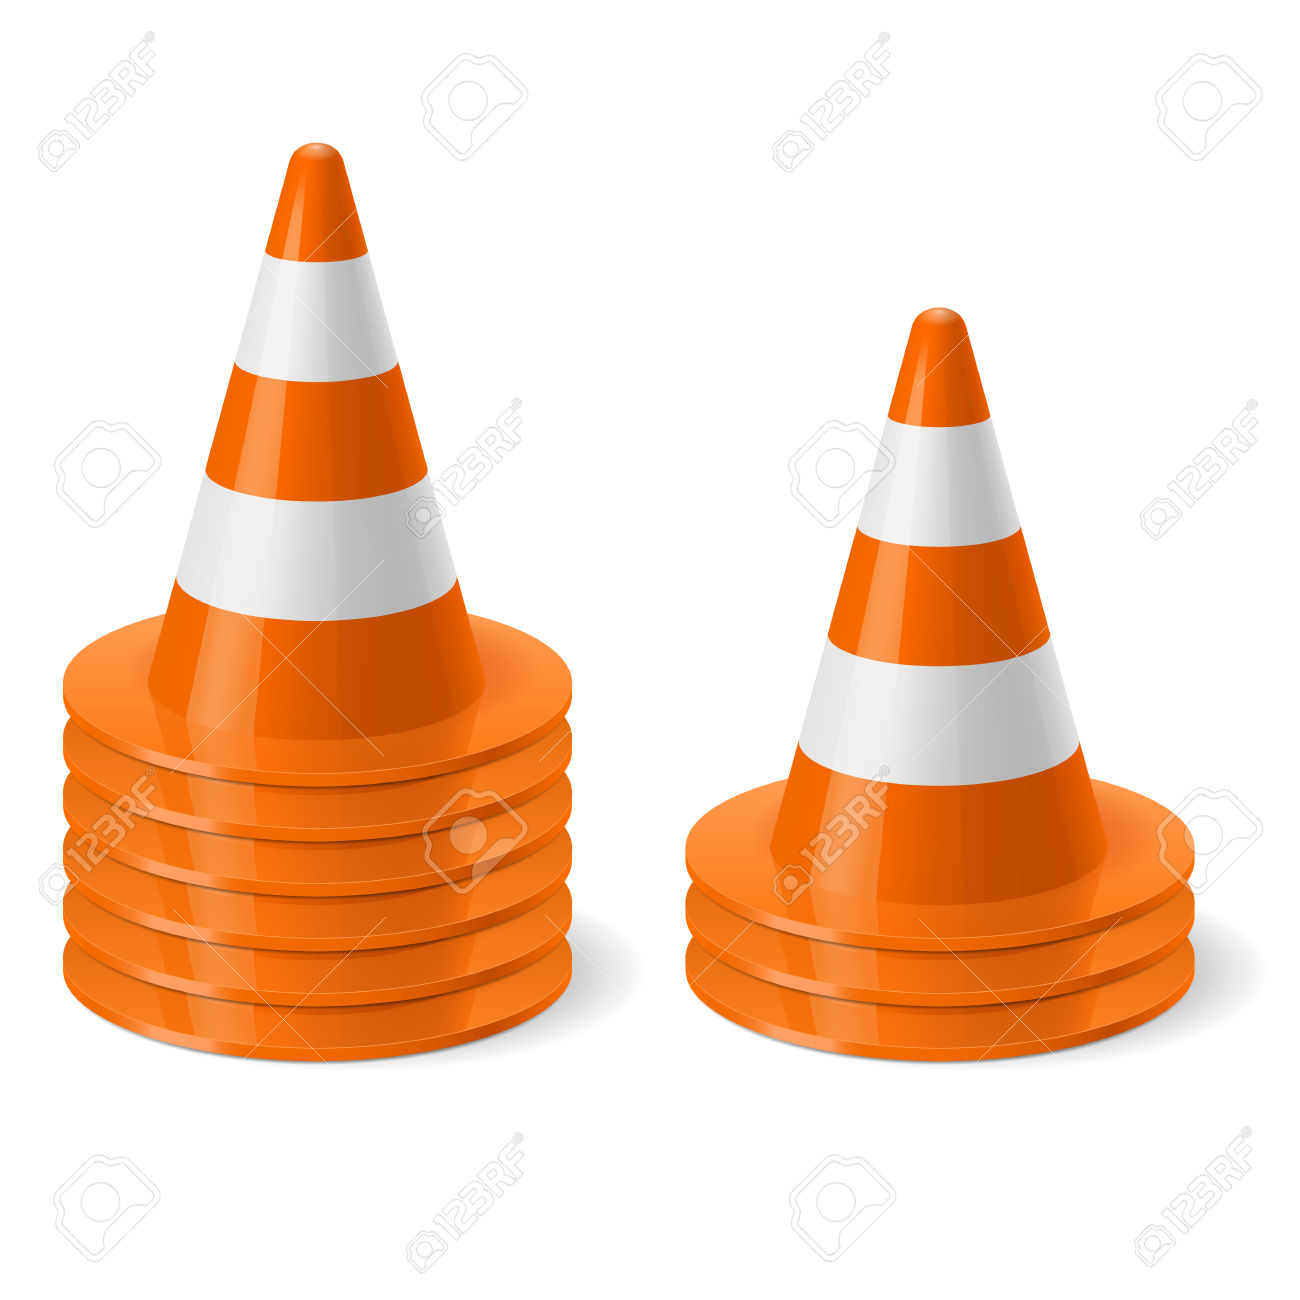 Piles Of Of Traffic Cone. Safety Sign Used To Prevent Accidents.